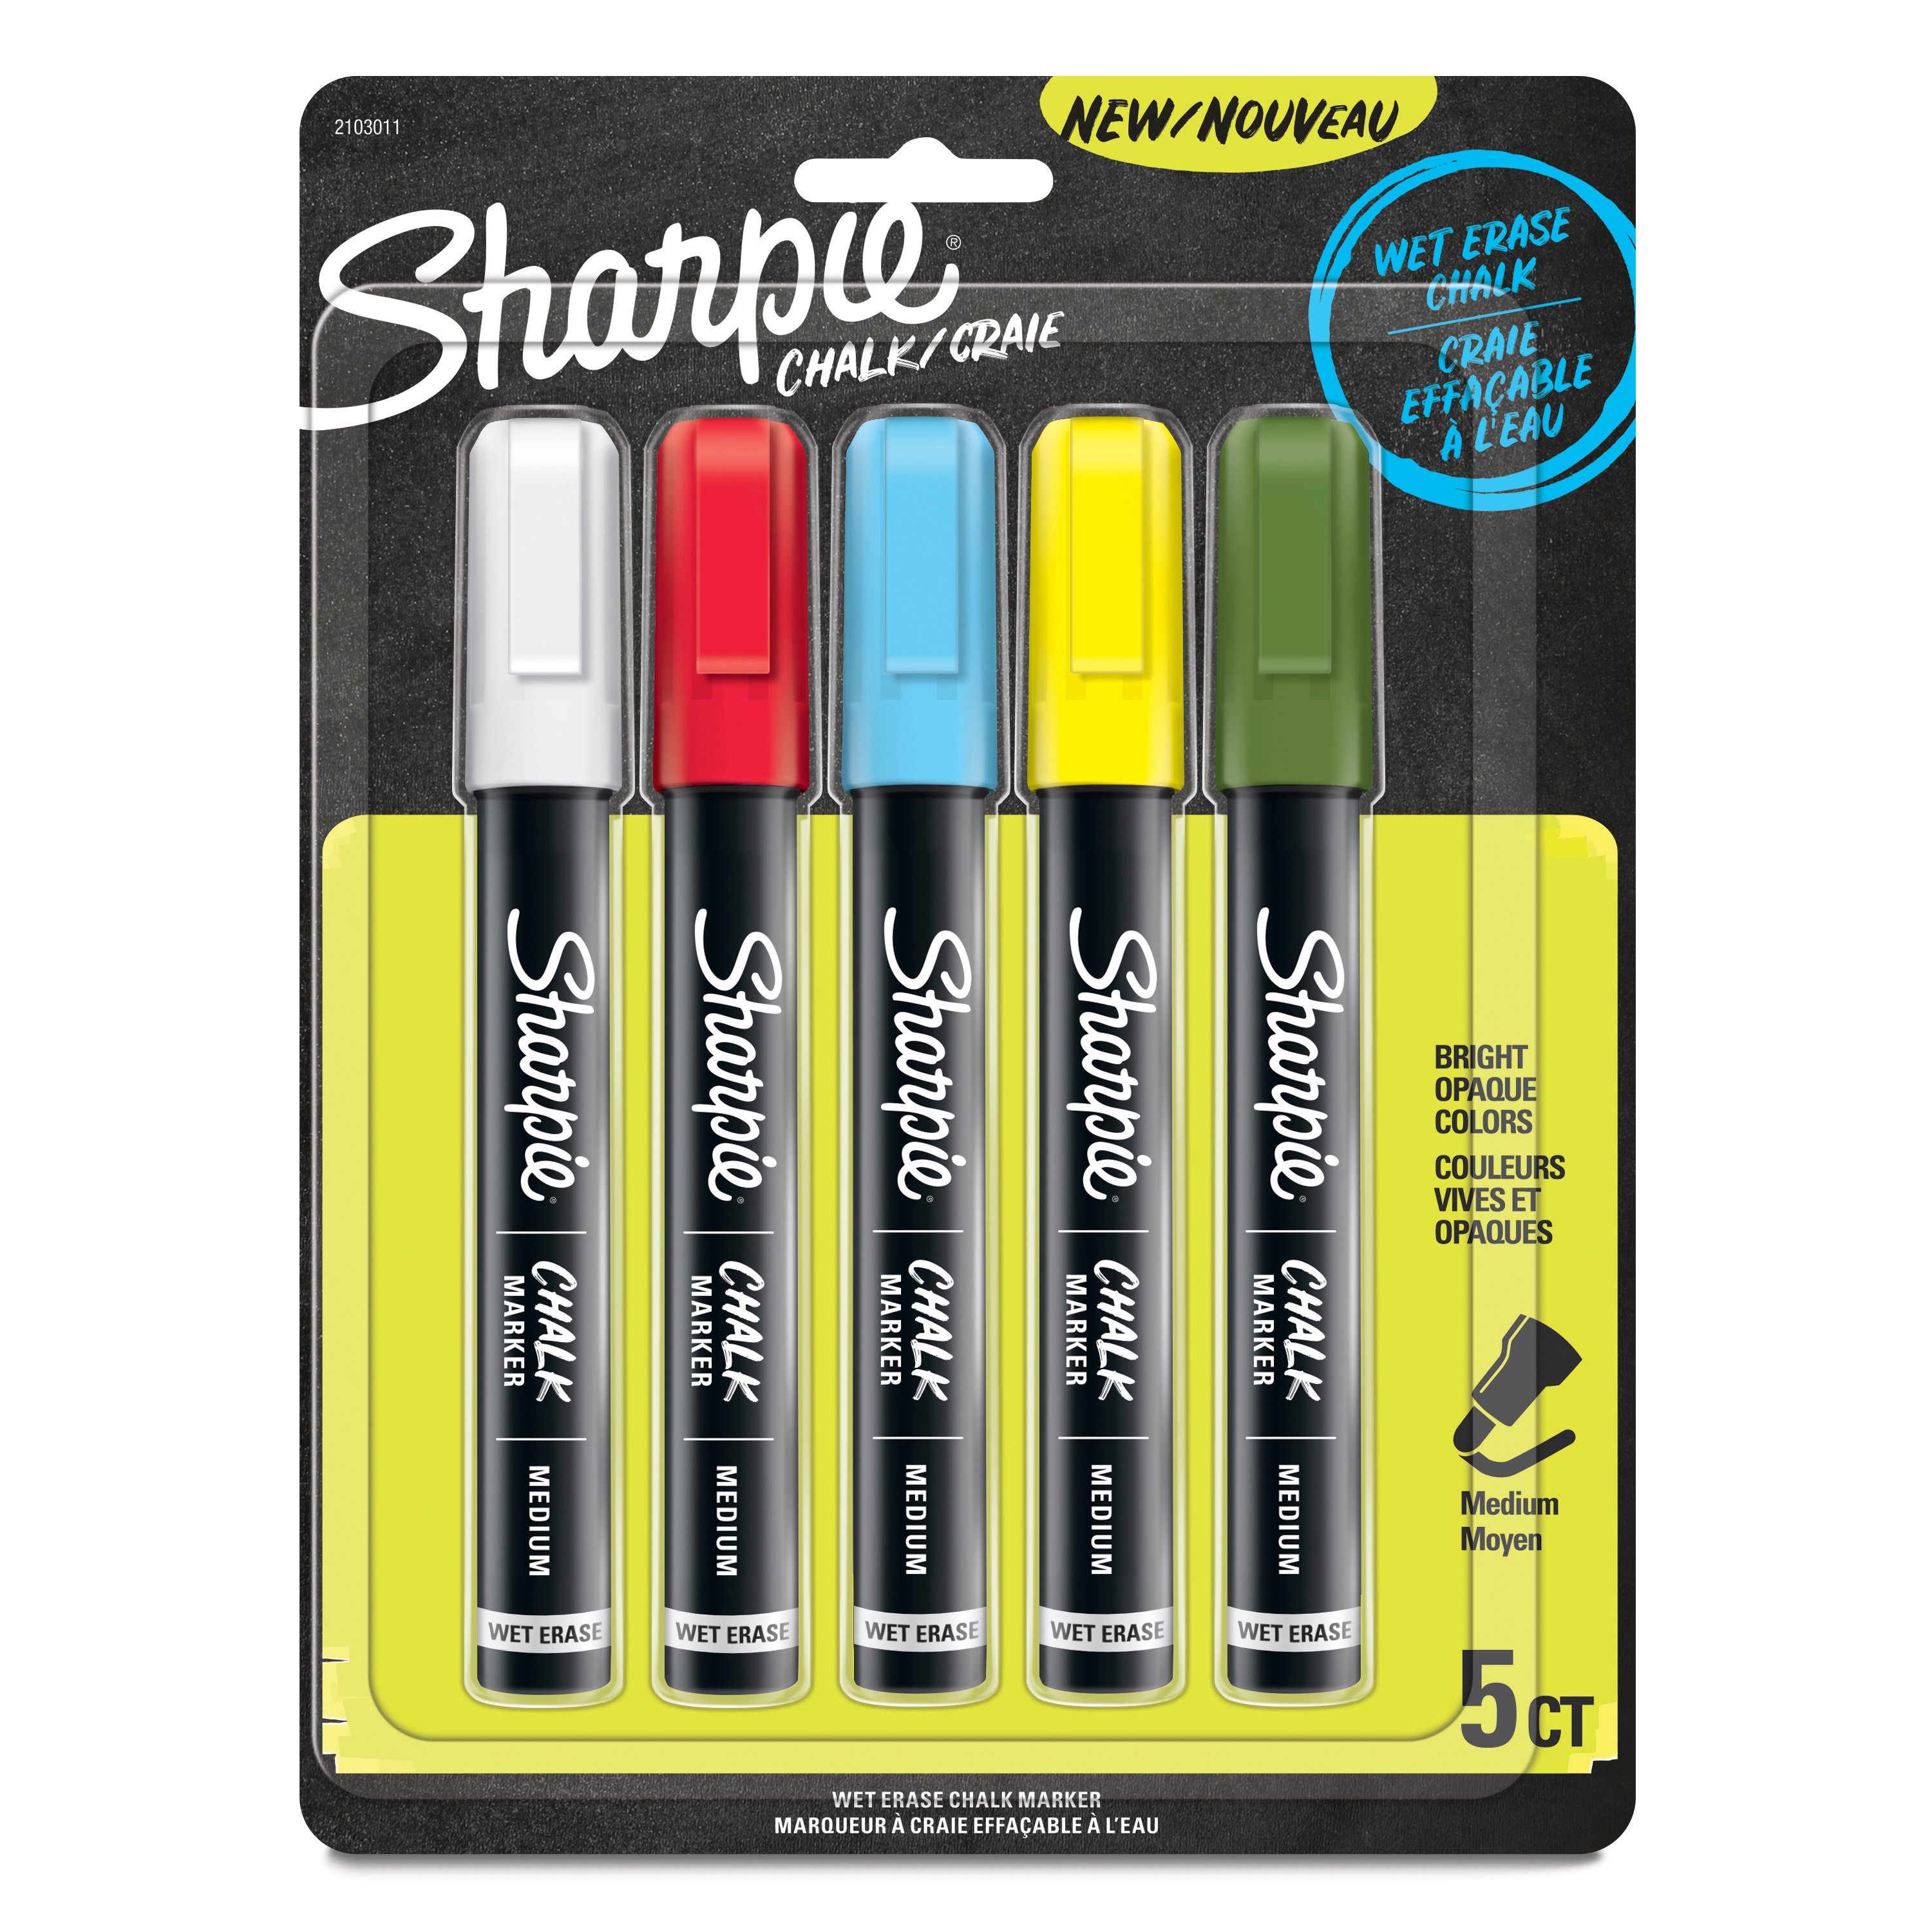 I also love Mr. Sketch, but these Sharpie Flip Chart markers are